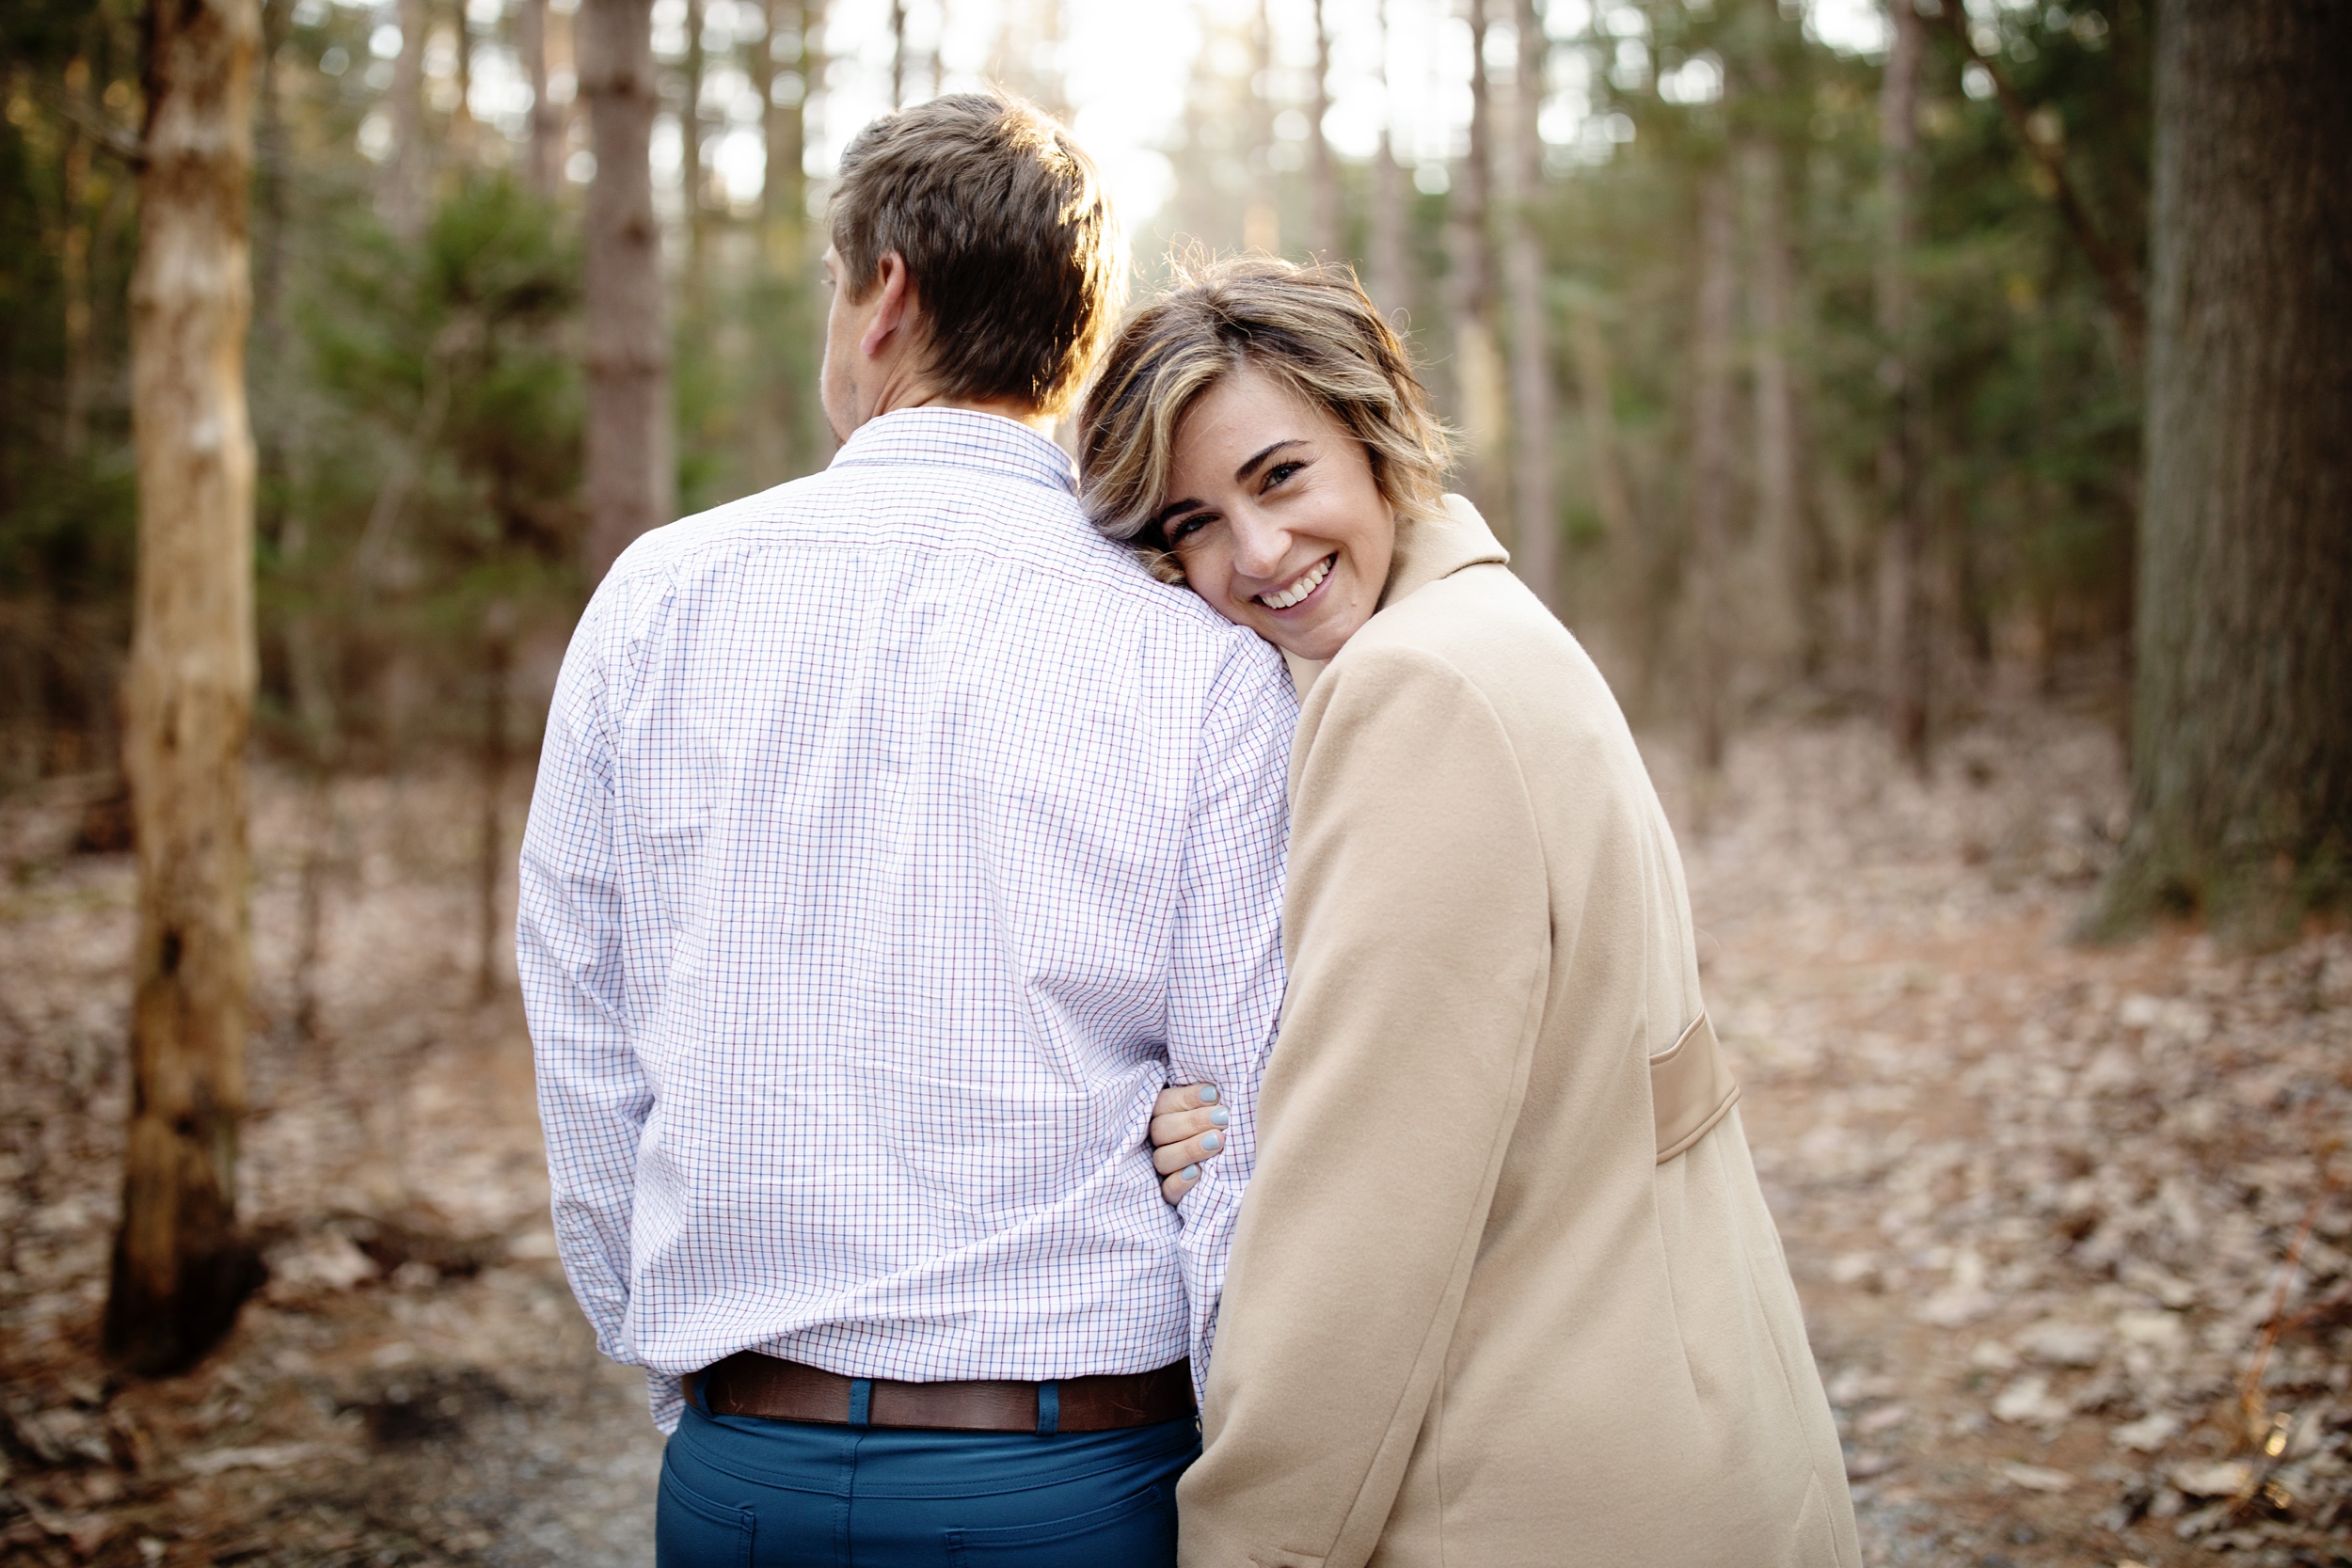 Nolde Forest Engagement and Wedding Photos, Reading, Pa Wedding and Engagement Photographer